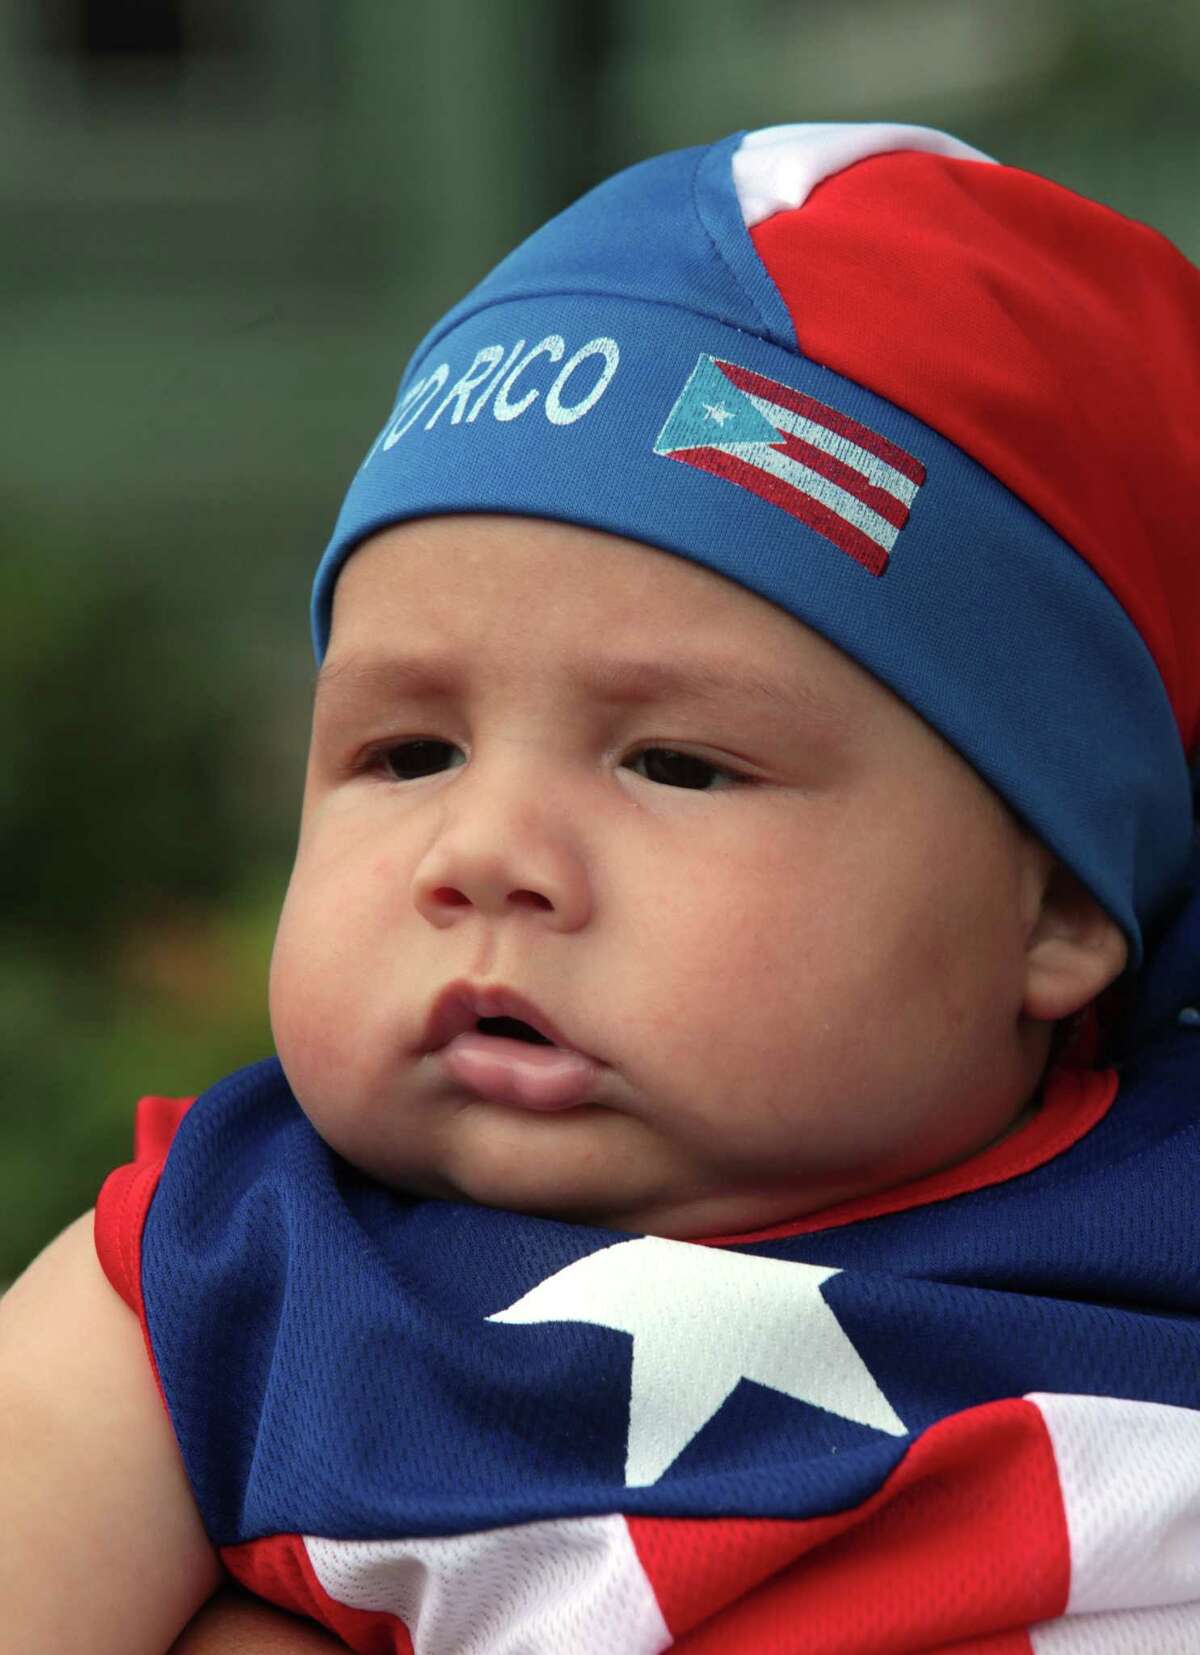 Joshua Perez, 4 mos, of Bridgeport, watches the annual Puerto Rican Parade of Fairfield County in Bridgeport, Conn. on Sunday, June 13, 2014.